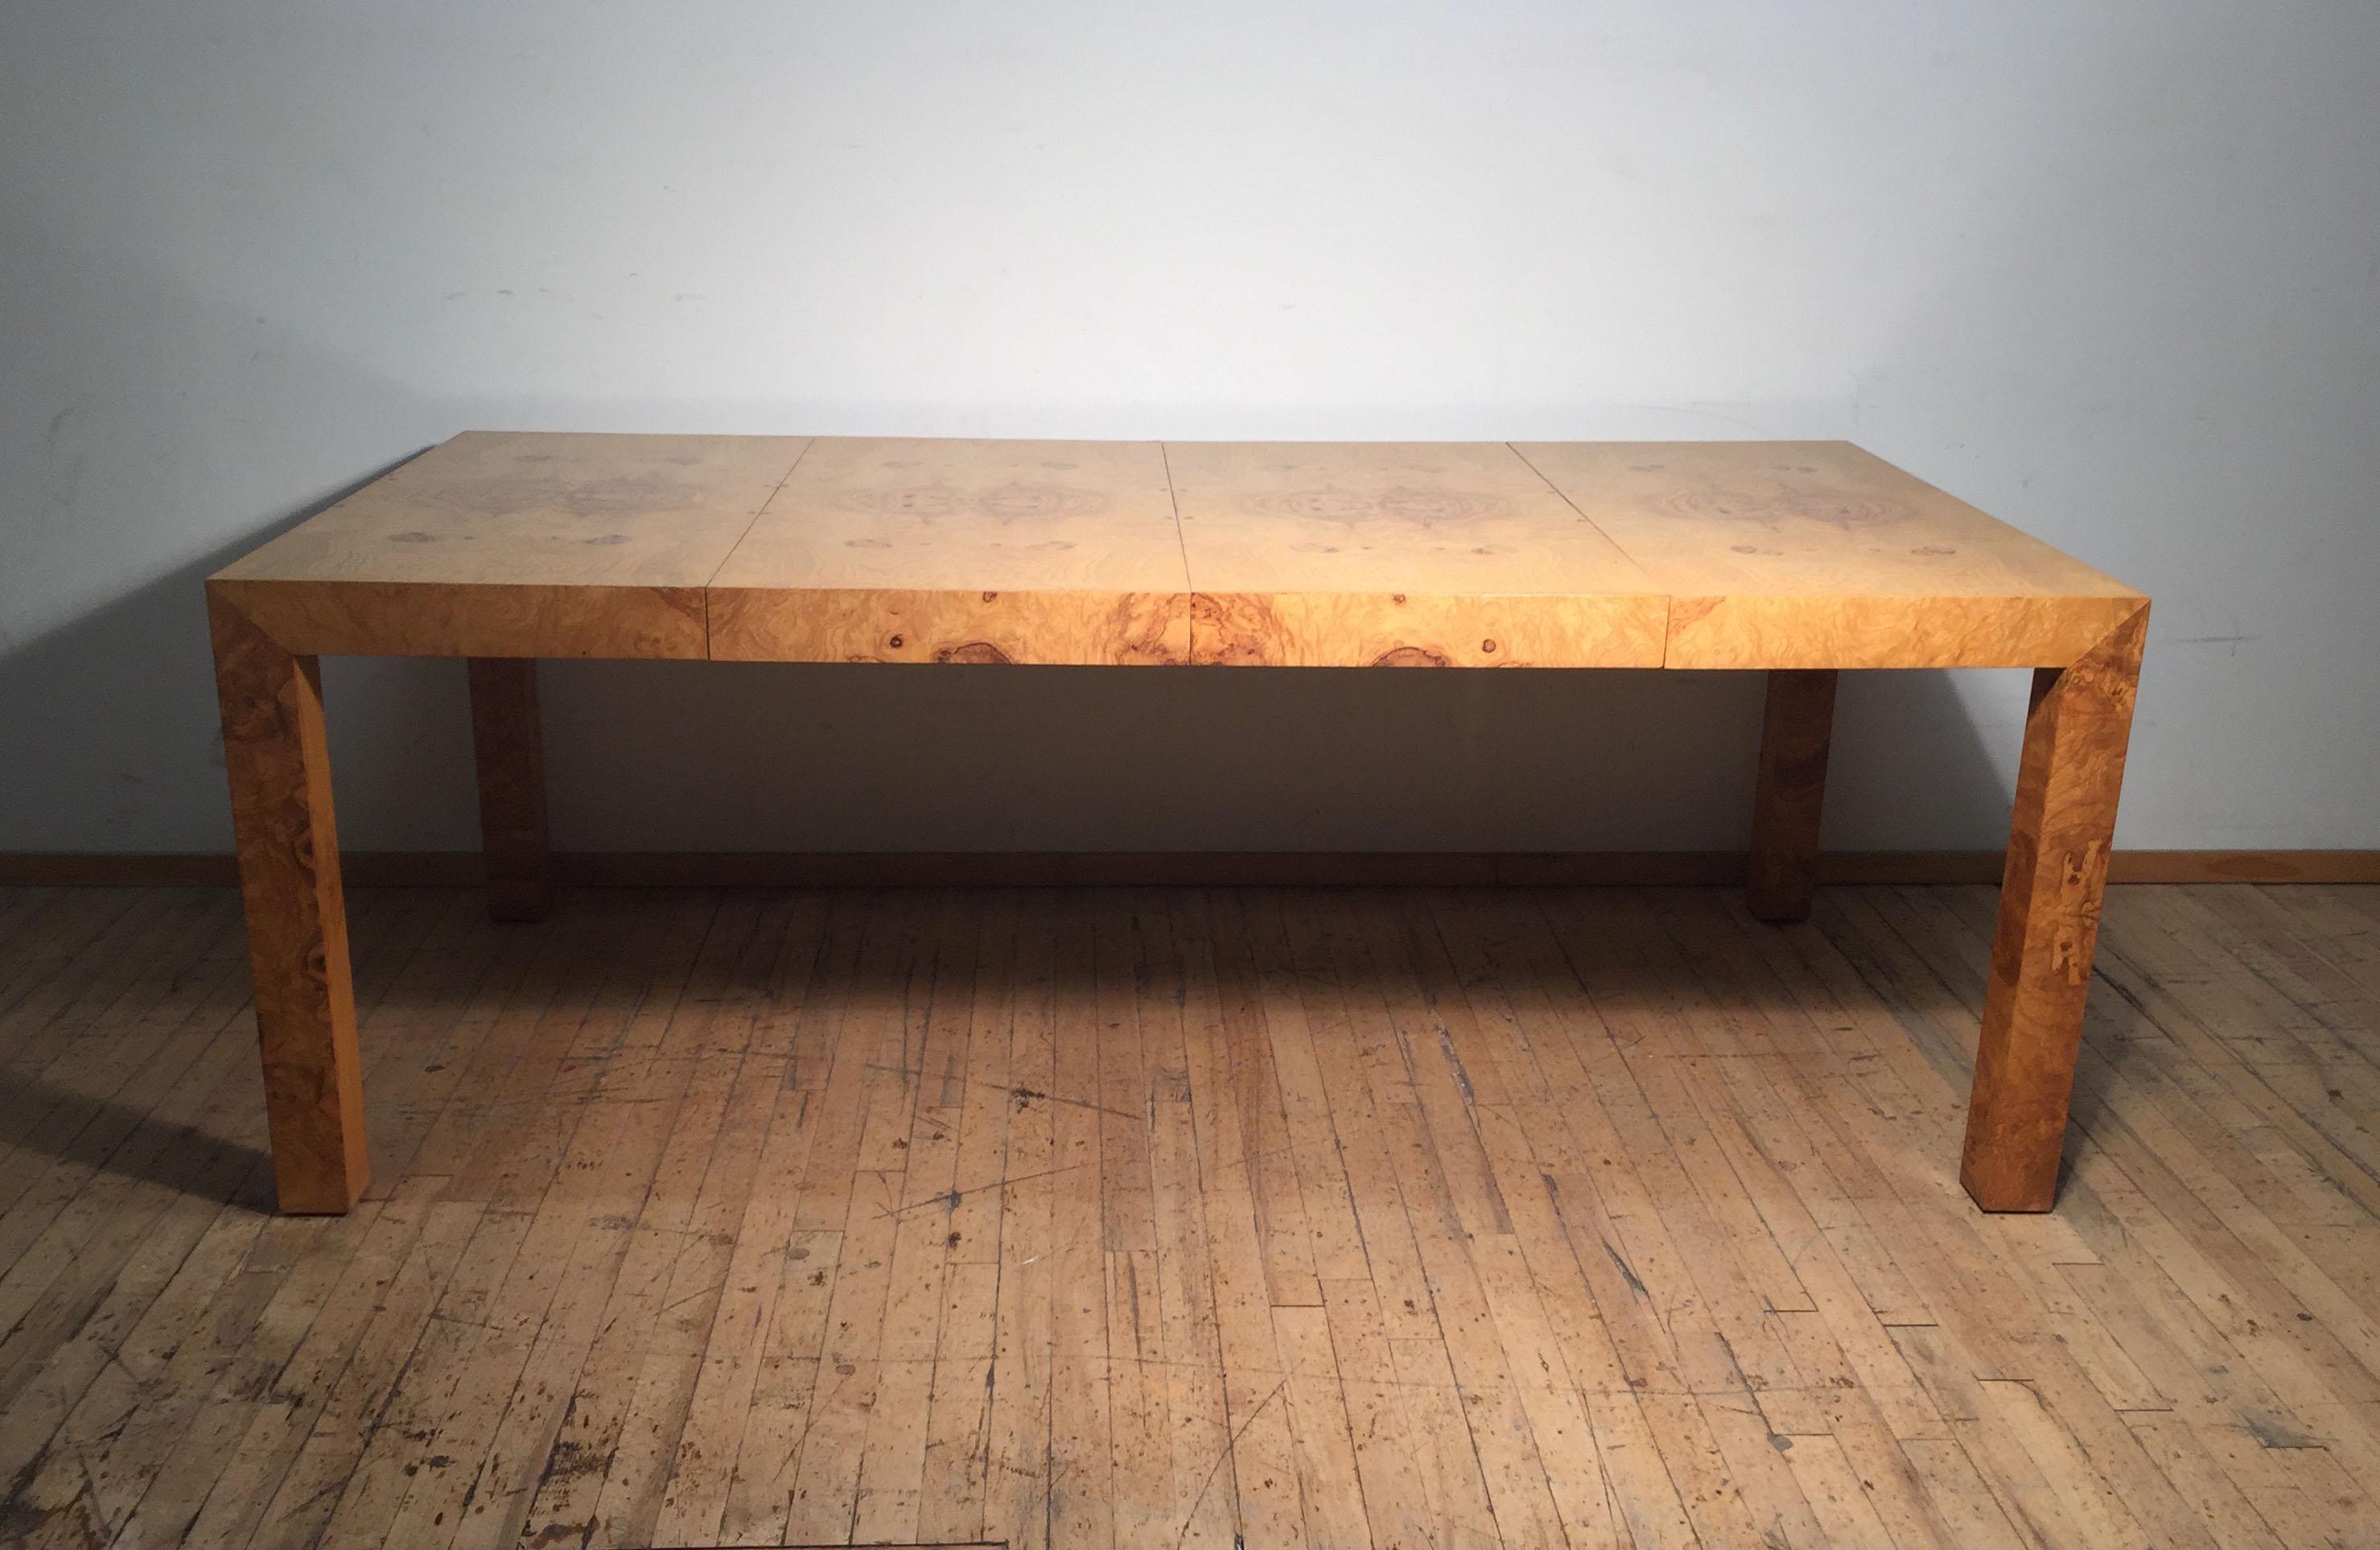 Fantastic dining table by Milo Baughman. Beautiful wood grain. Can either be a small square dinette table or functions as a longer rectangular dining table with two Leafs. Condition is all original and is in excellent vintage condition. Well